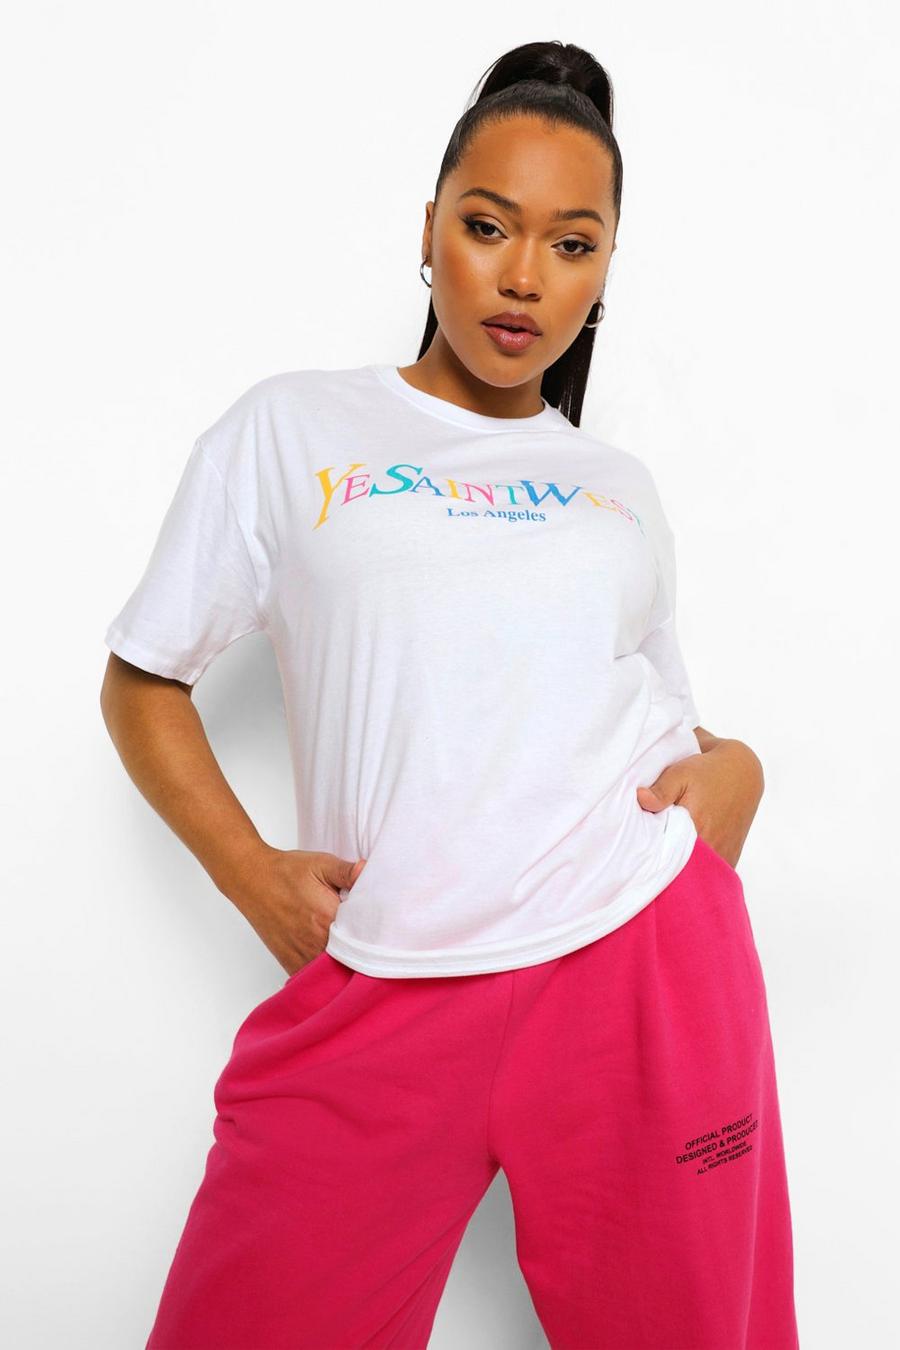 T-shirt Plus Size con scritta Ye Saint West in colori arcobaleno, White image number 1